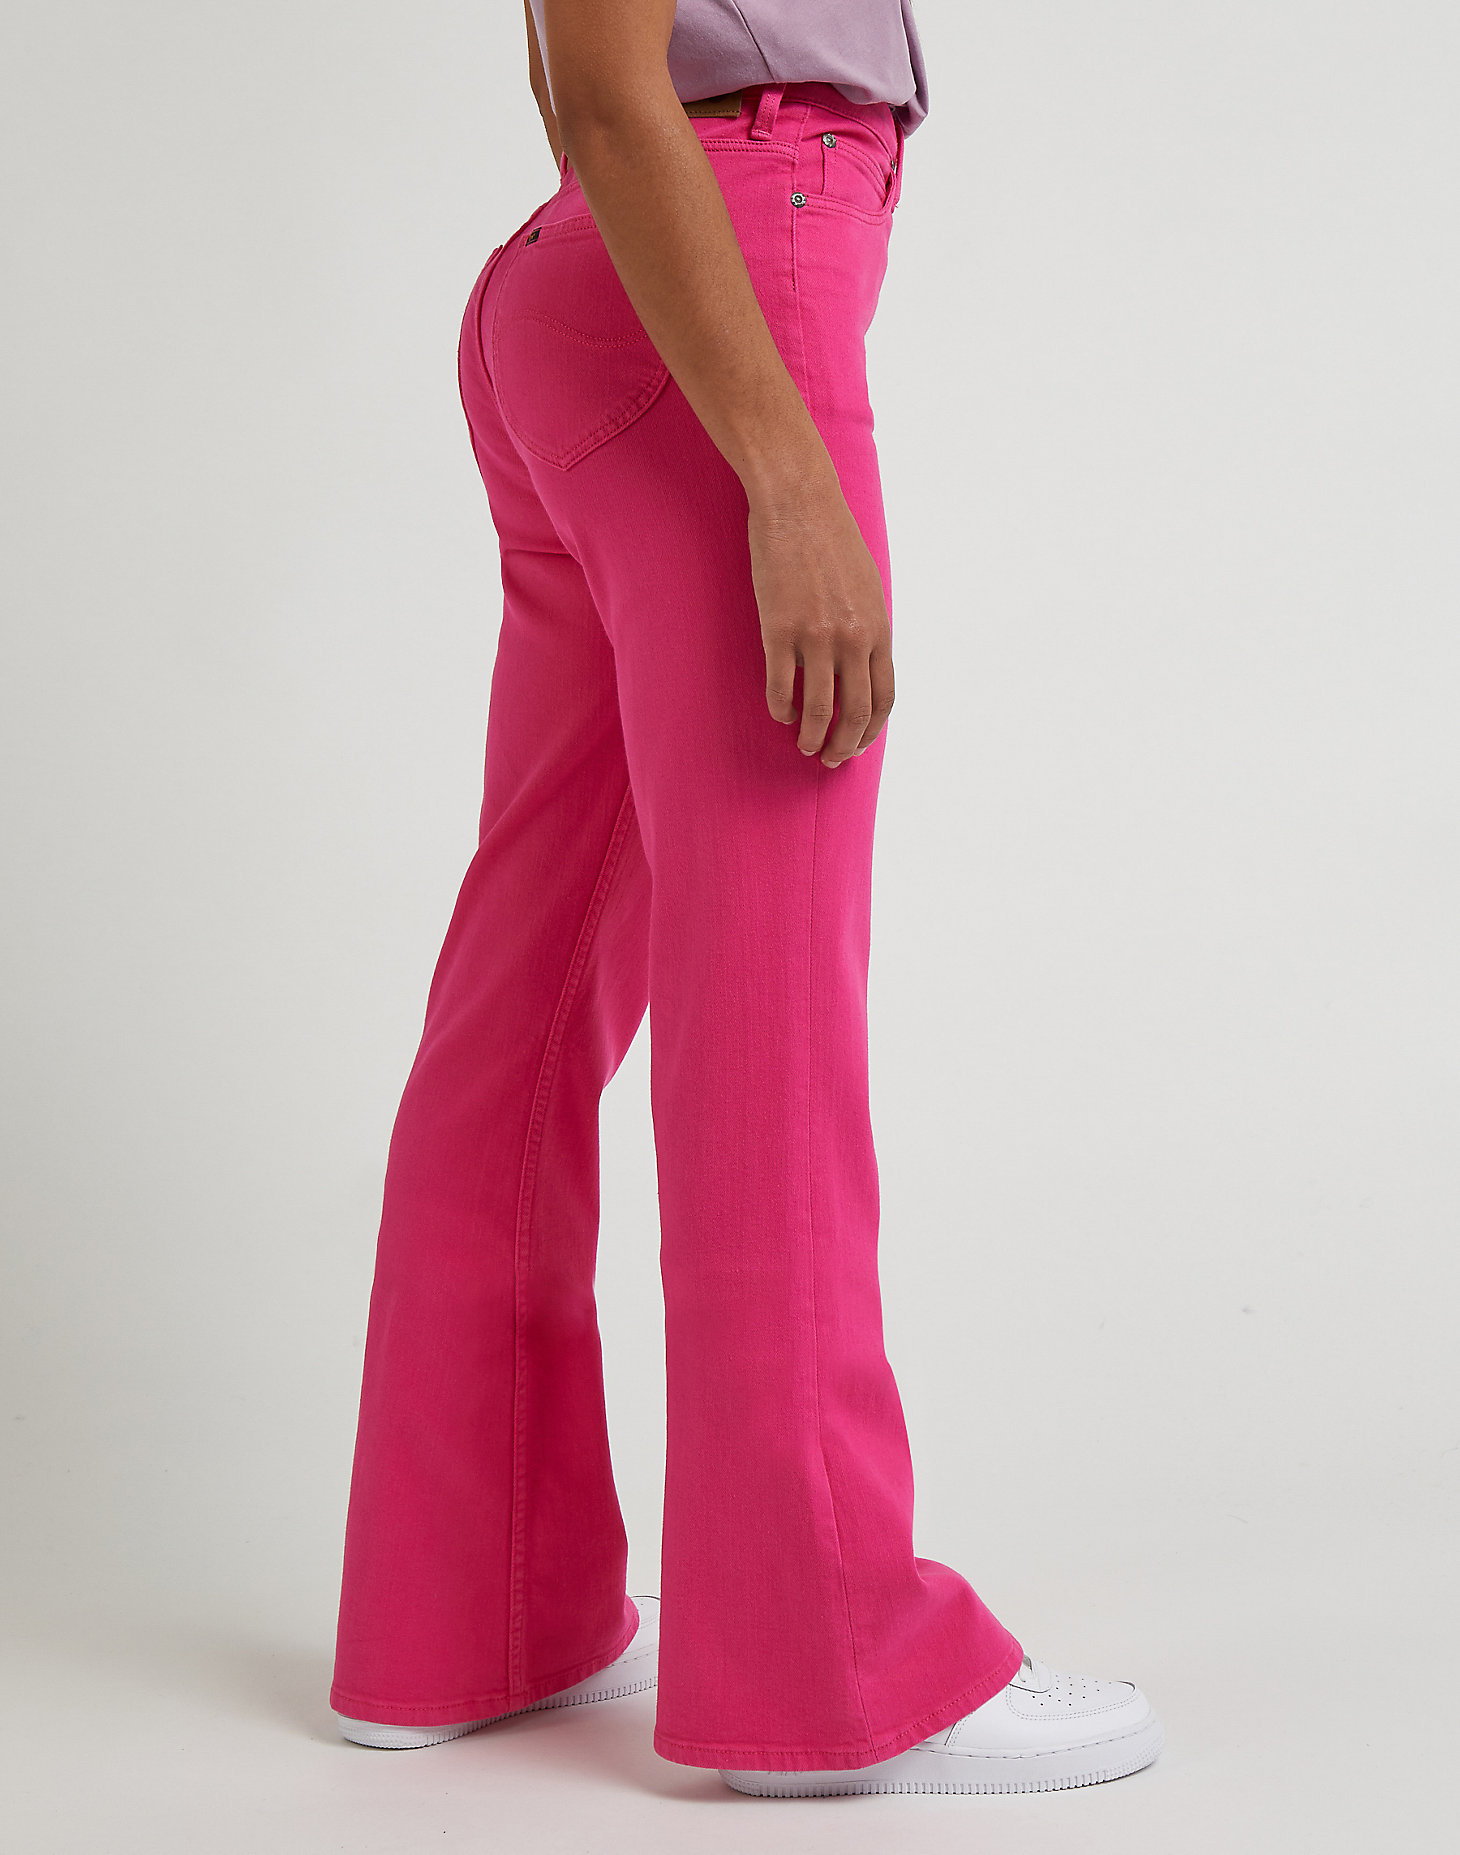 Breese in Roxie Pink alternative view 3